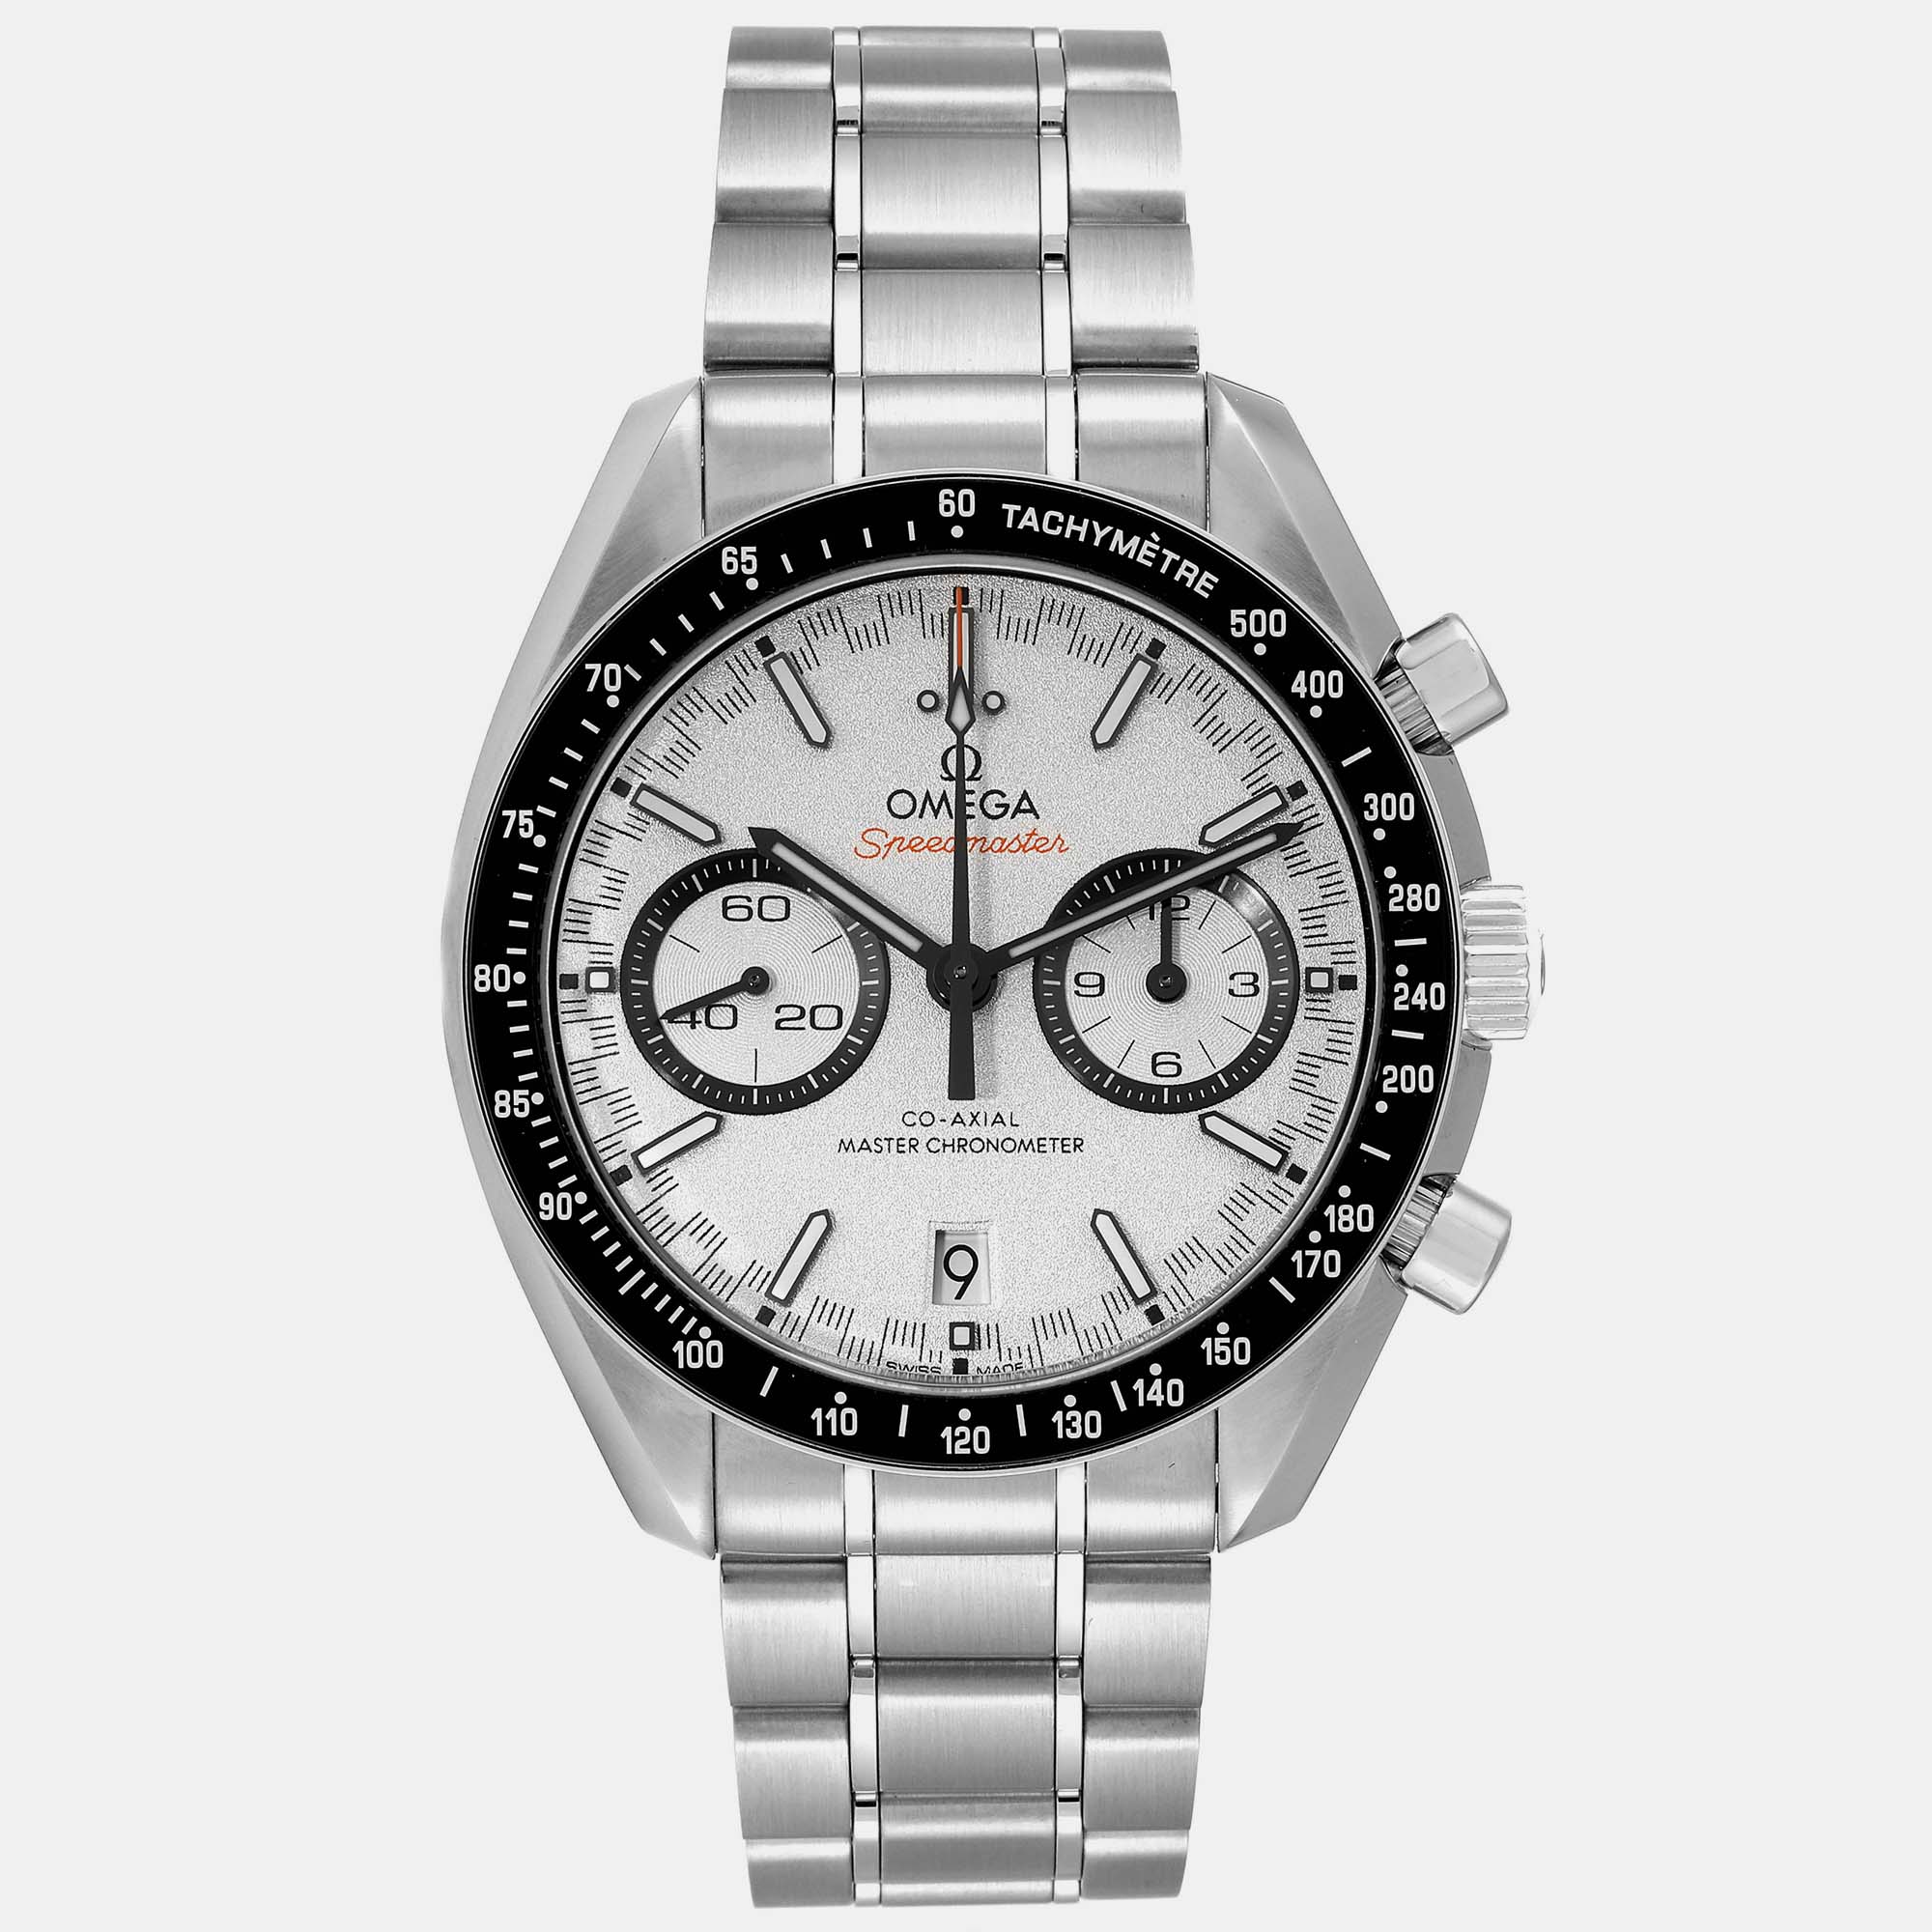 Omega silver stainless steel speedmaster racing 329.30.44.51.04.001 automatic men's wristwatch 44 mm